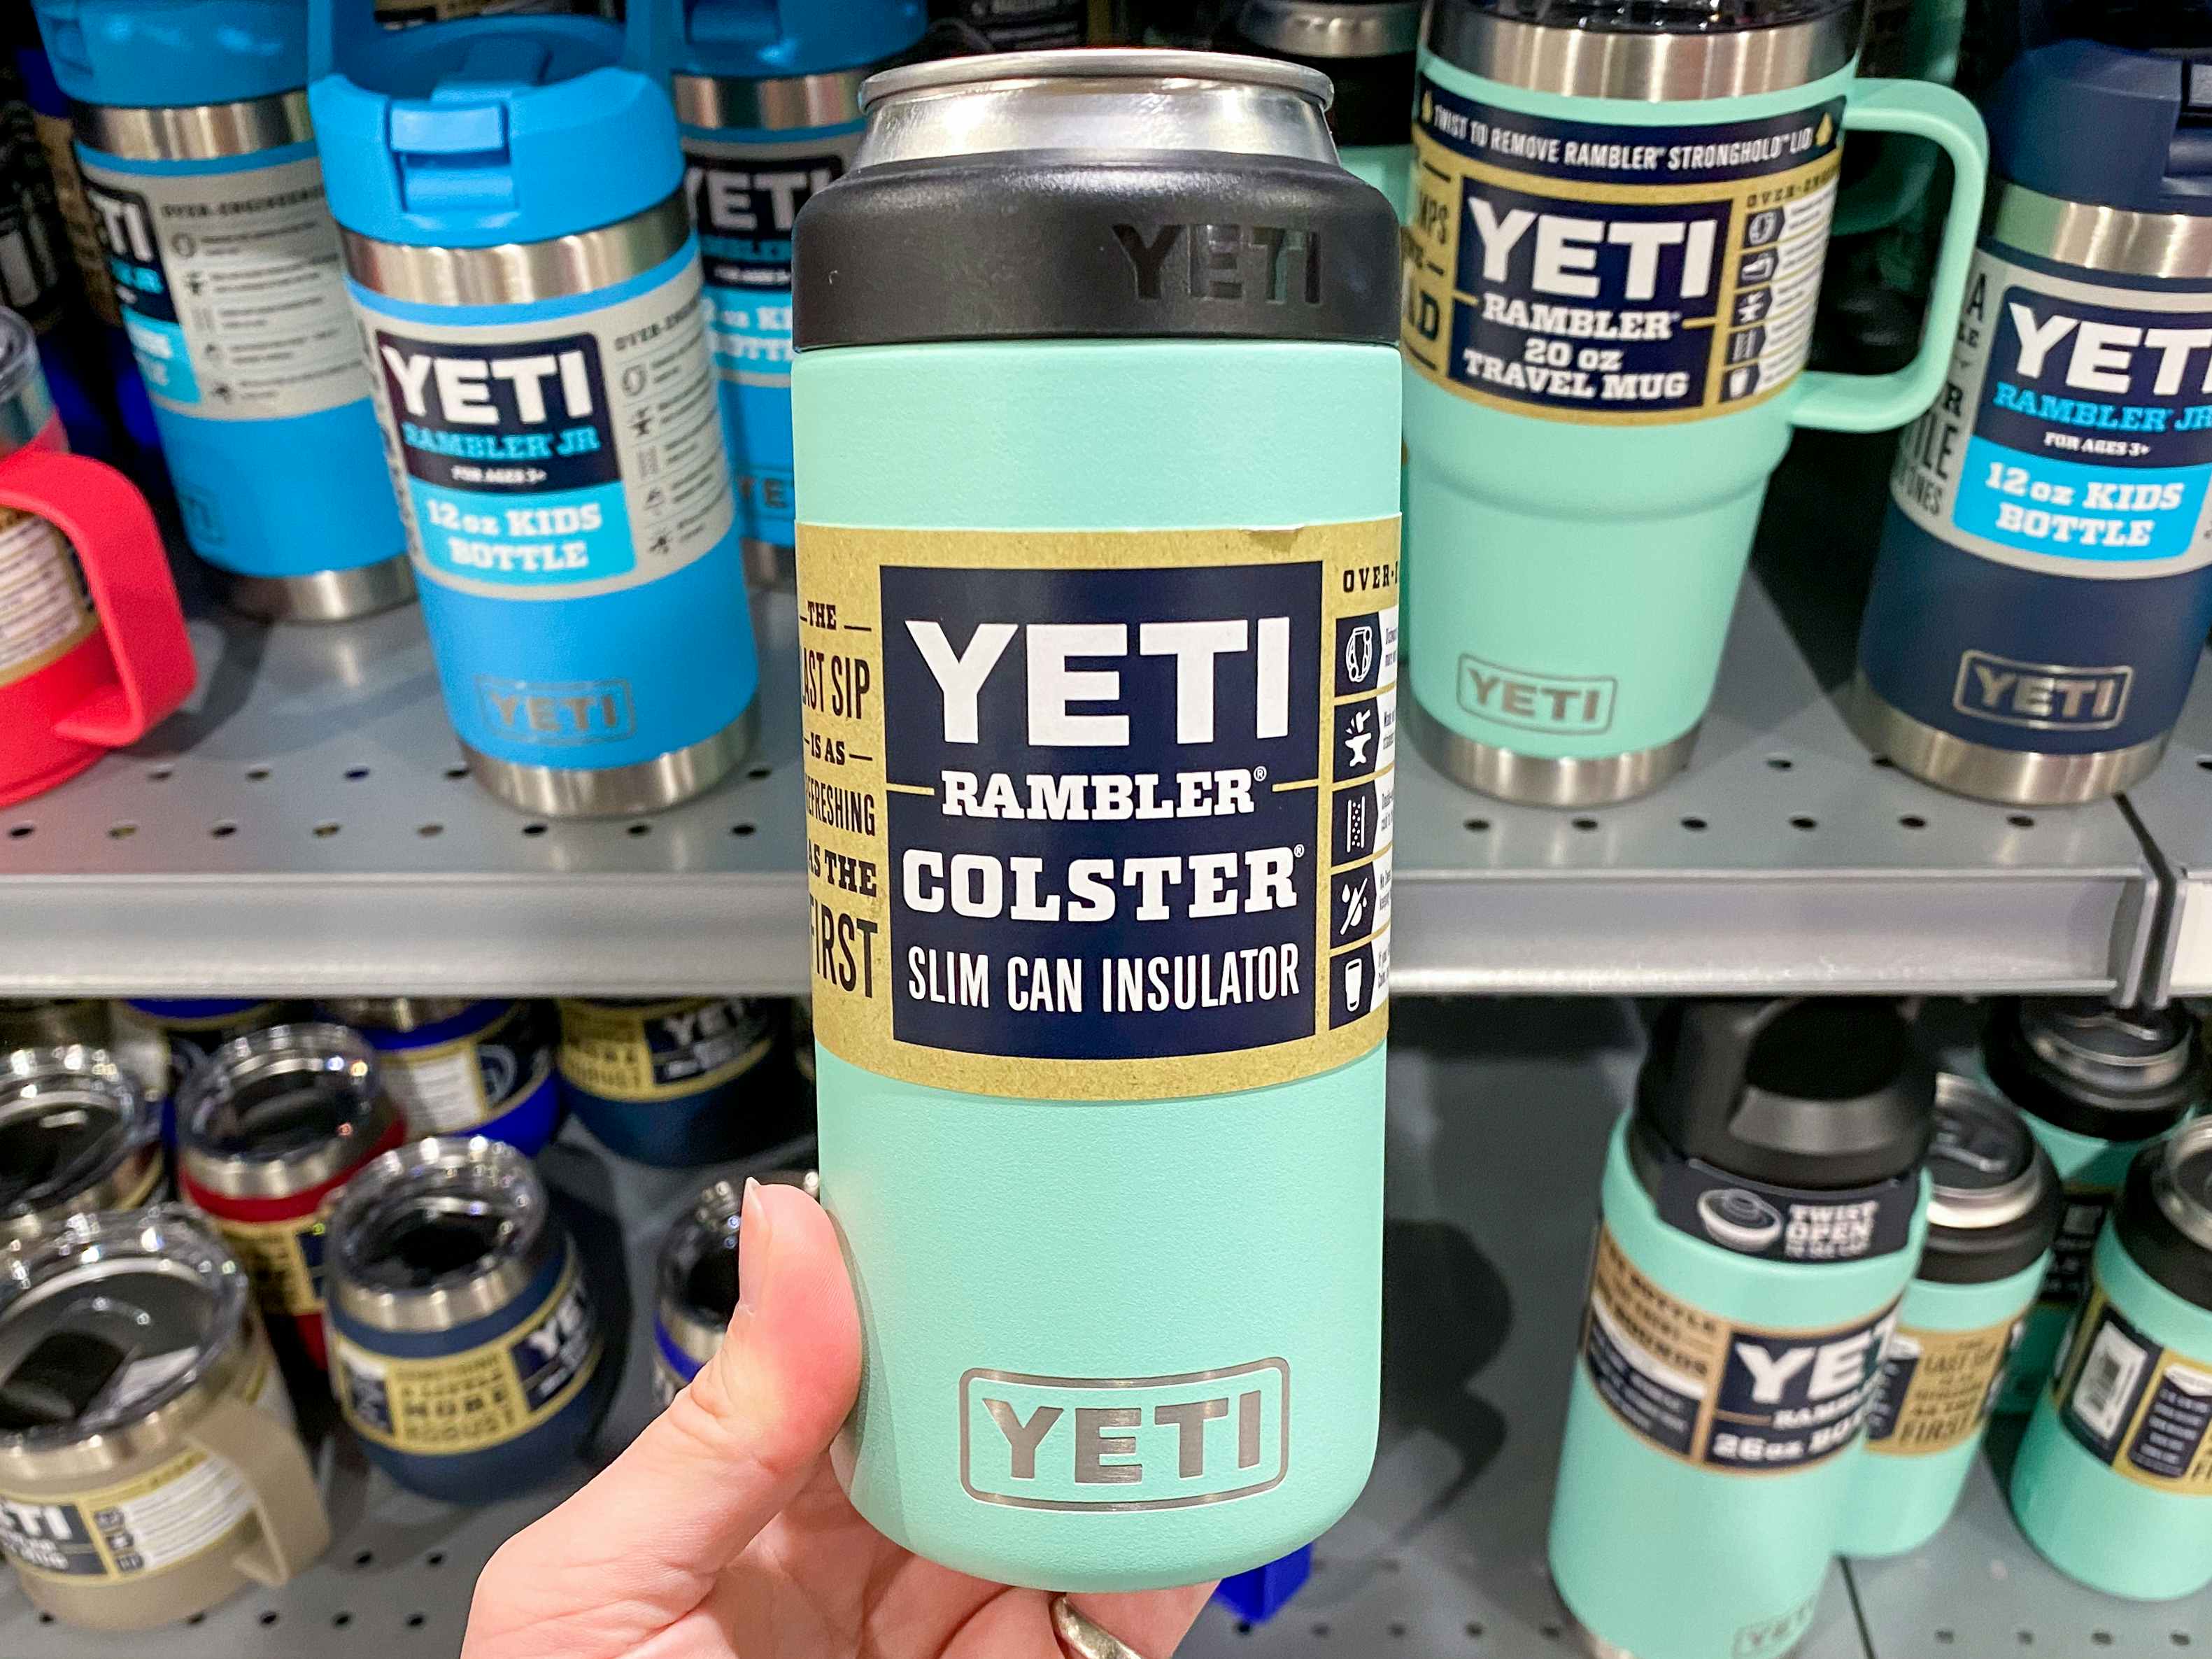 A person's hand holding up a teal Yeti Rambler Colster Slim Can Insulator in front of a shelf of more Yeti products at Dick's Sporting Goods.